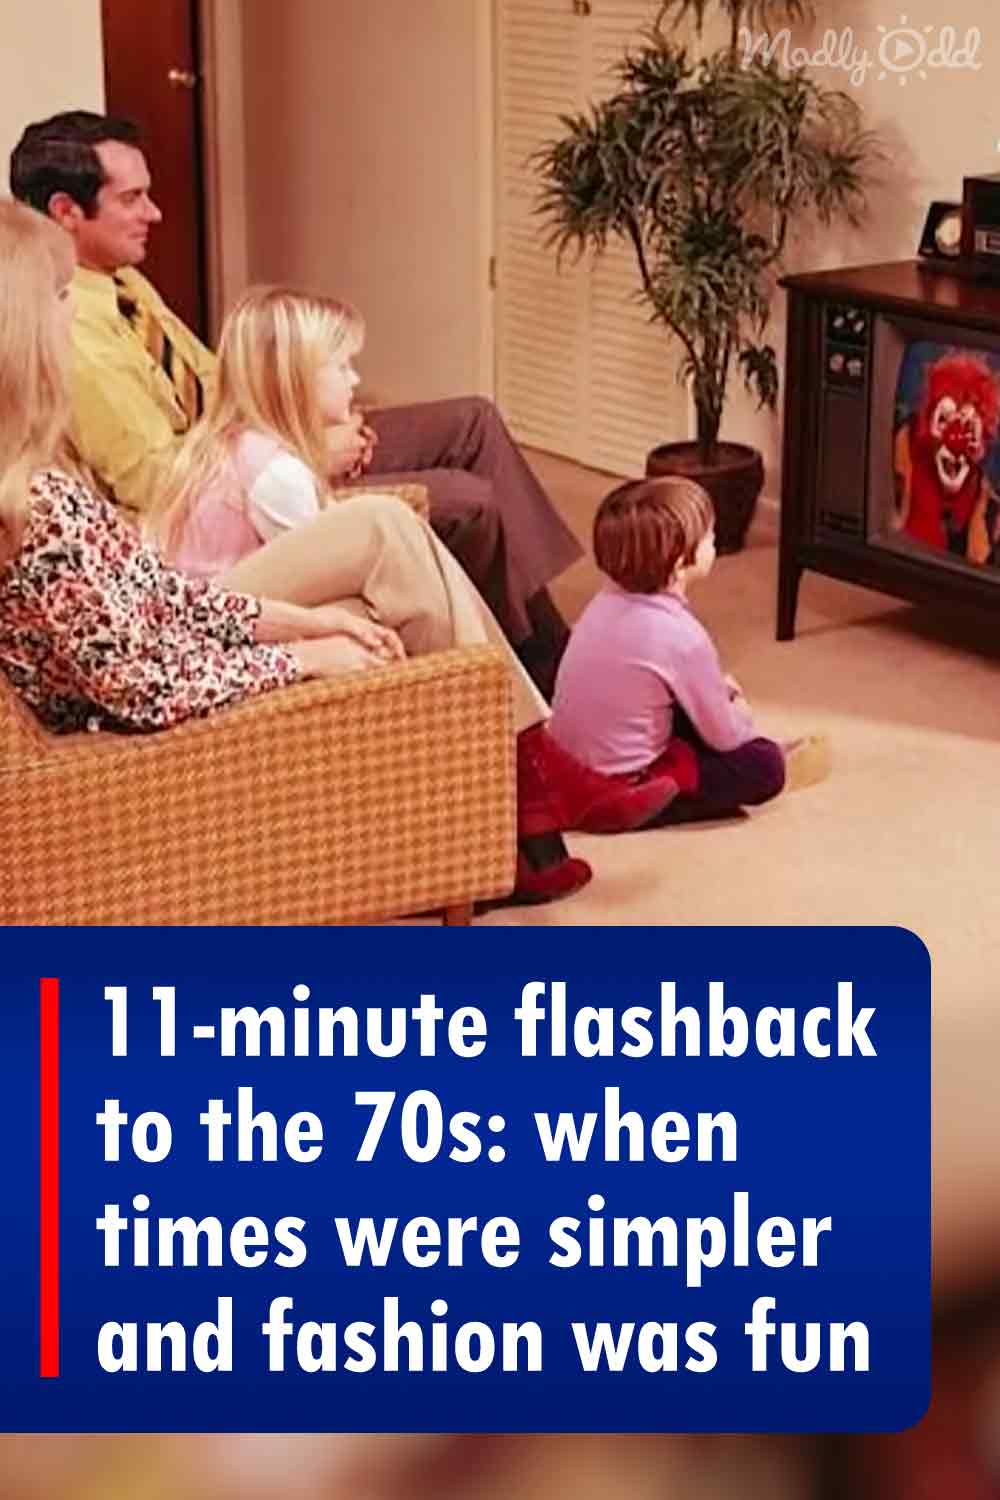 11-minute flashback to the 70s: when times were simpler and fashion was fun